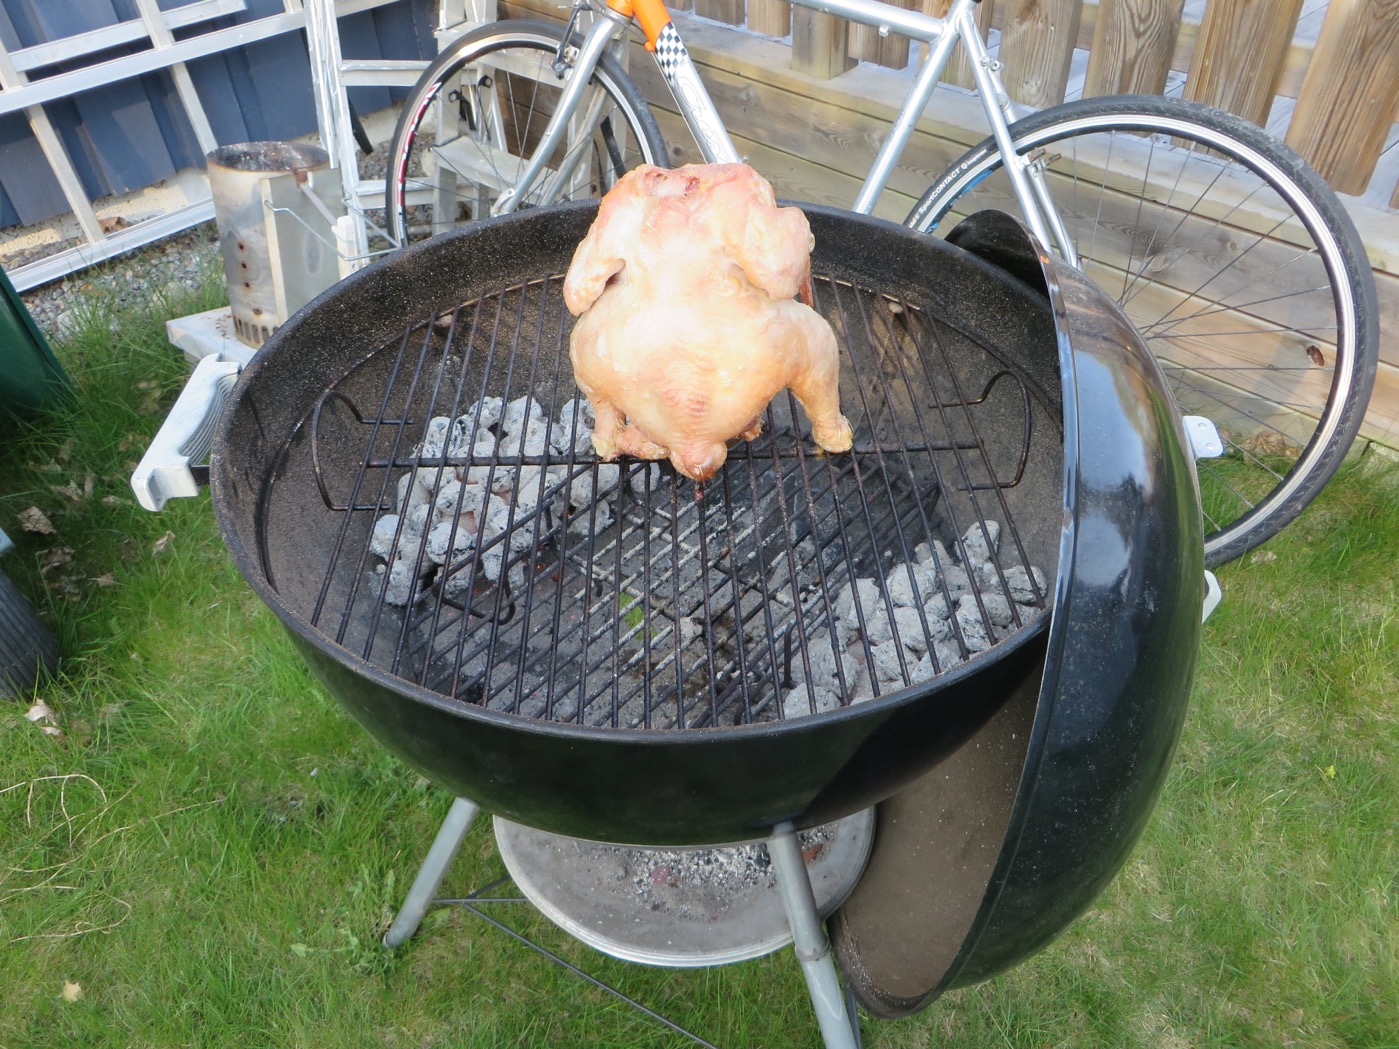 Beer can chicken in the making.